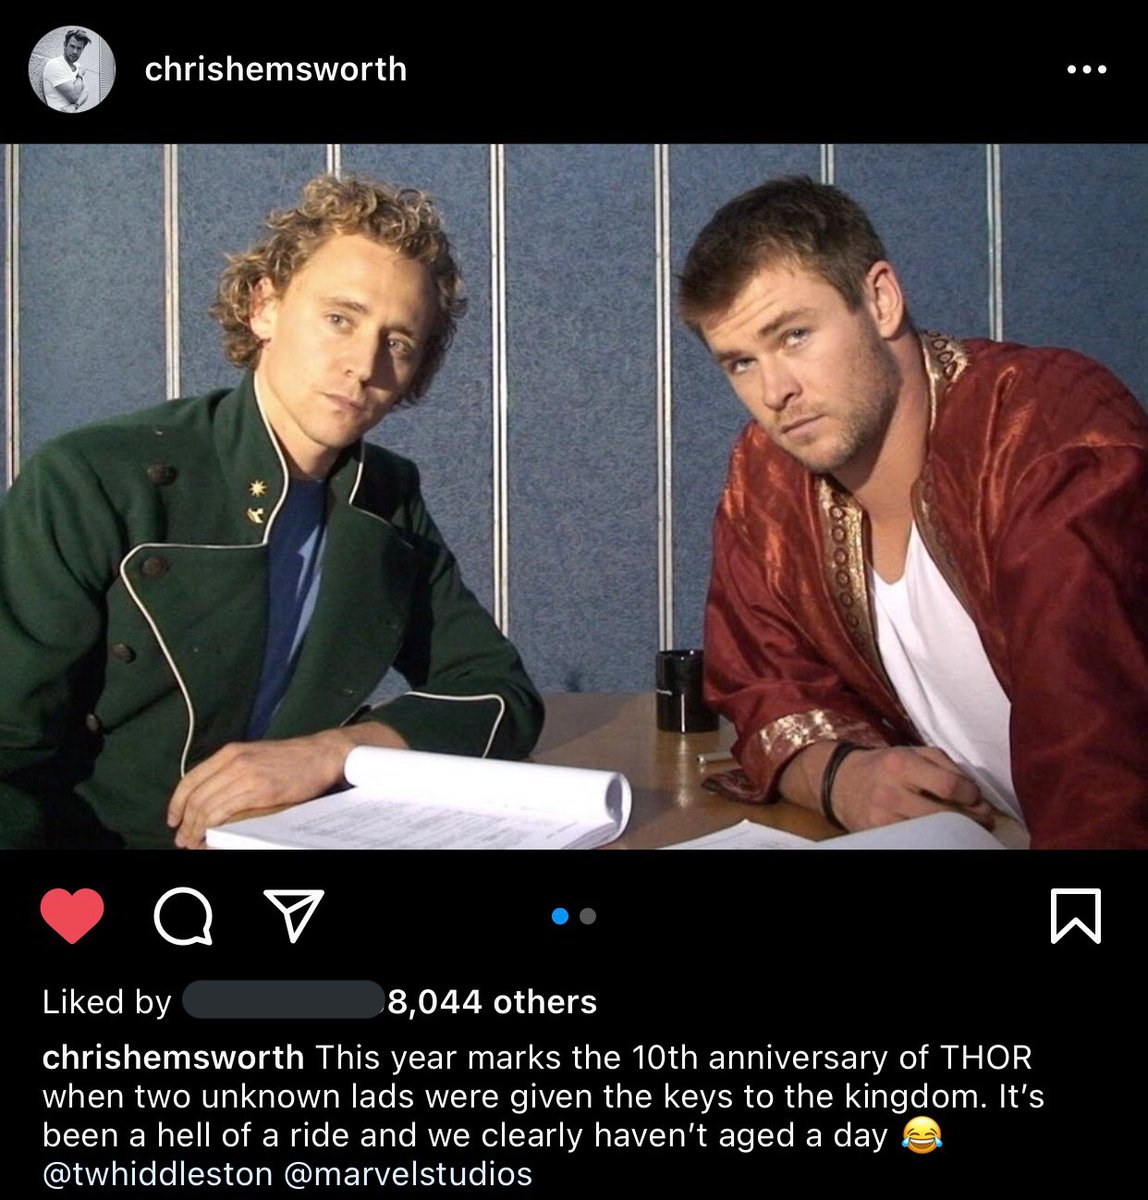 RT @azgardians: chris posting for 10 years of thor y’all don’t understand i’m crying https://t.co/wp5k4Baubw